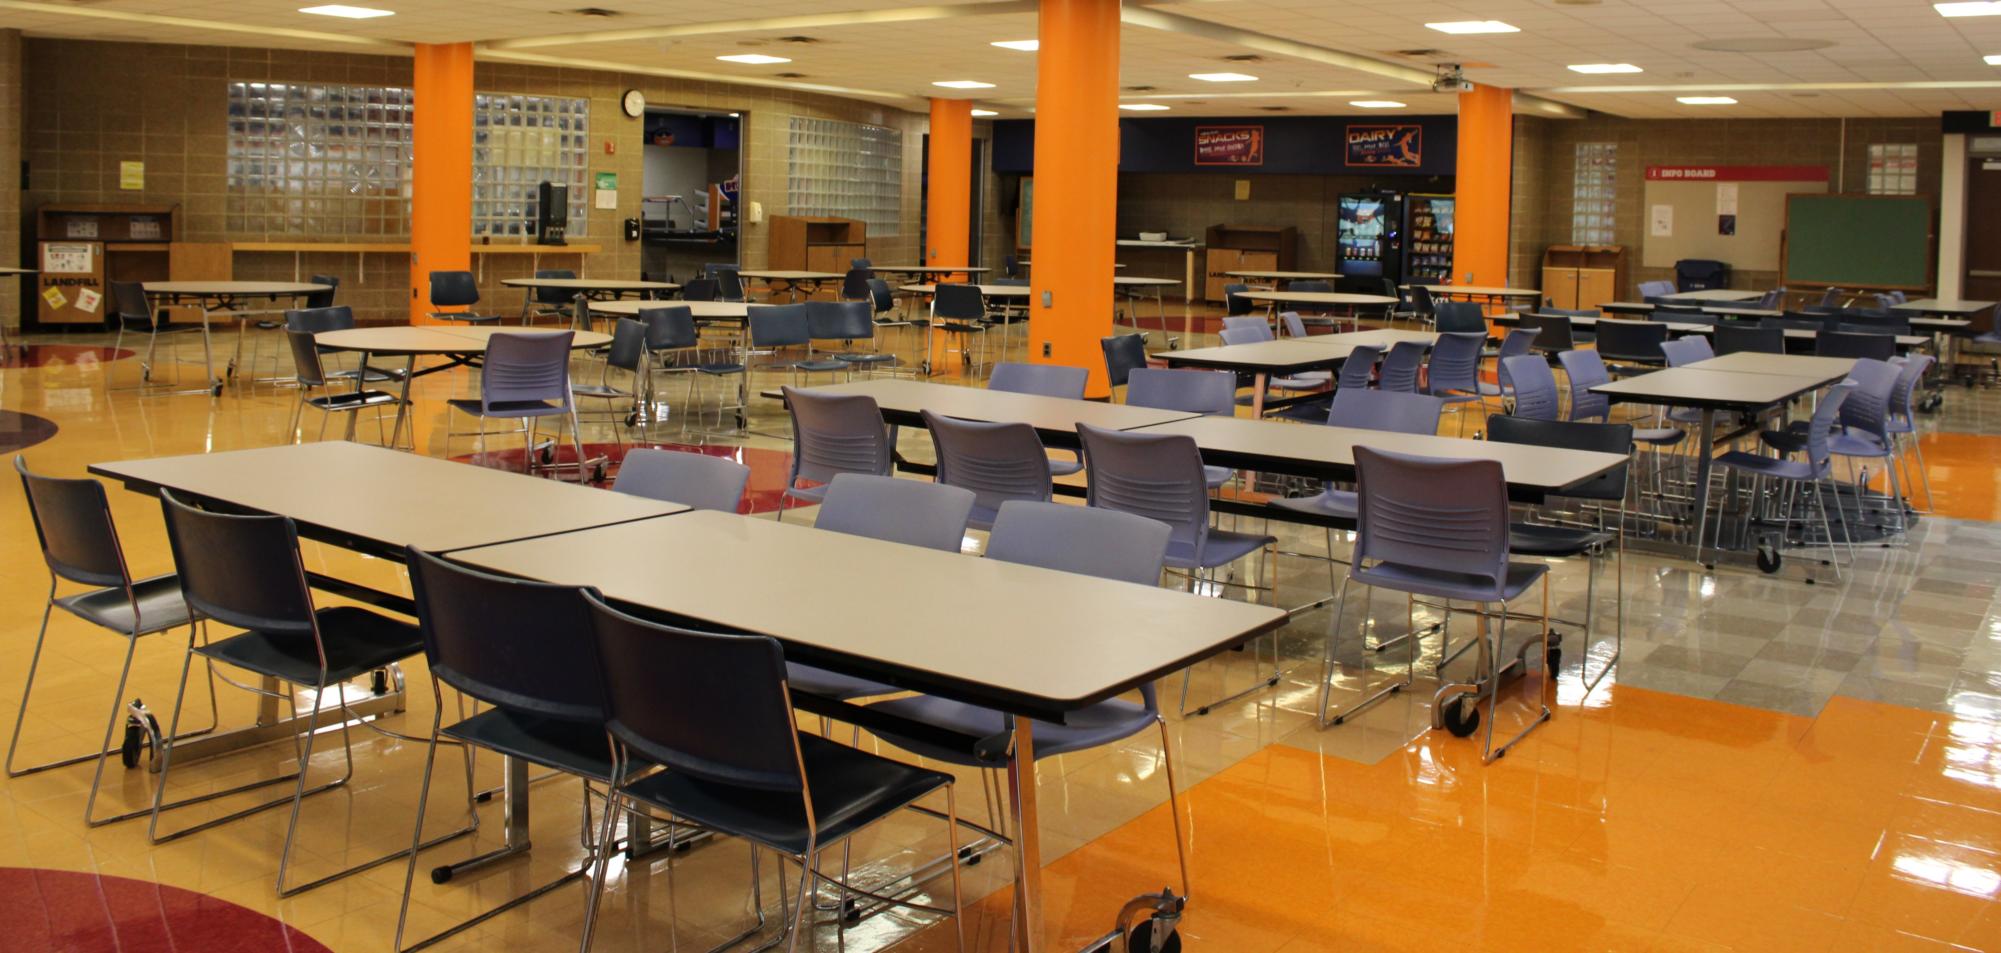 North Cafeteria, the new drop-in cafeteria location.